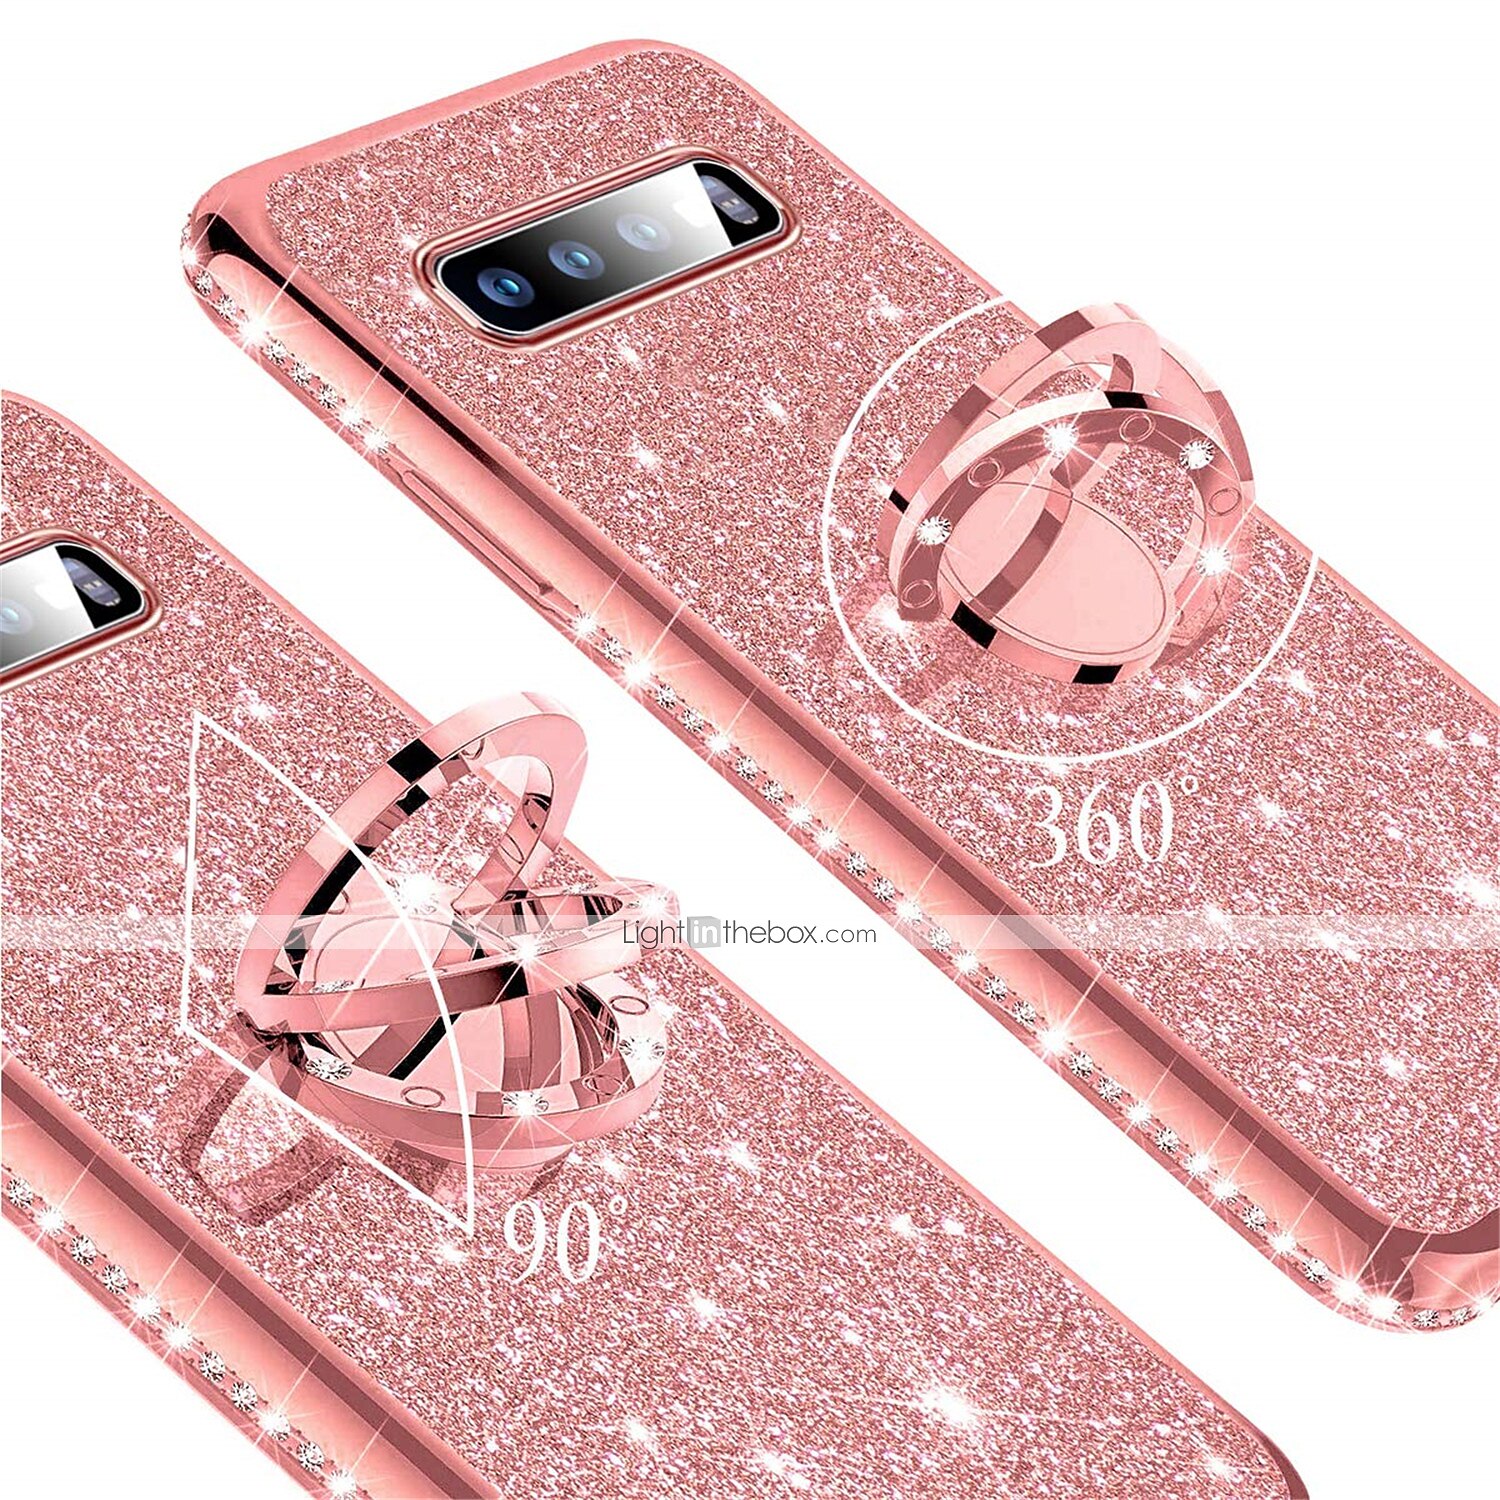 LAPOPNUT Rose Gold Case for Samsung Galaxy S8 Plus Case Luxury Crystal Rhinestone Soft Rubber Bumper Cover Bling Diamond Glitter Mirror Makeup Case with Ring Stand Holder